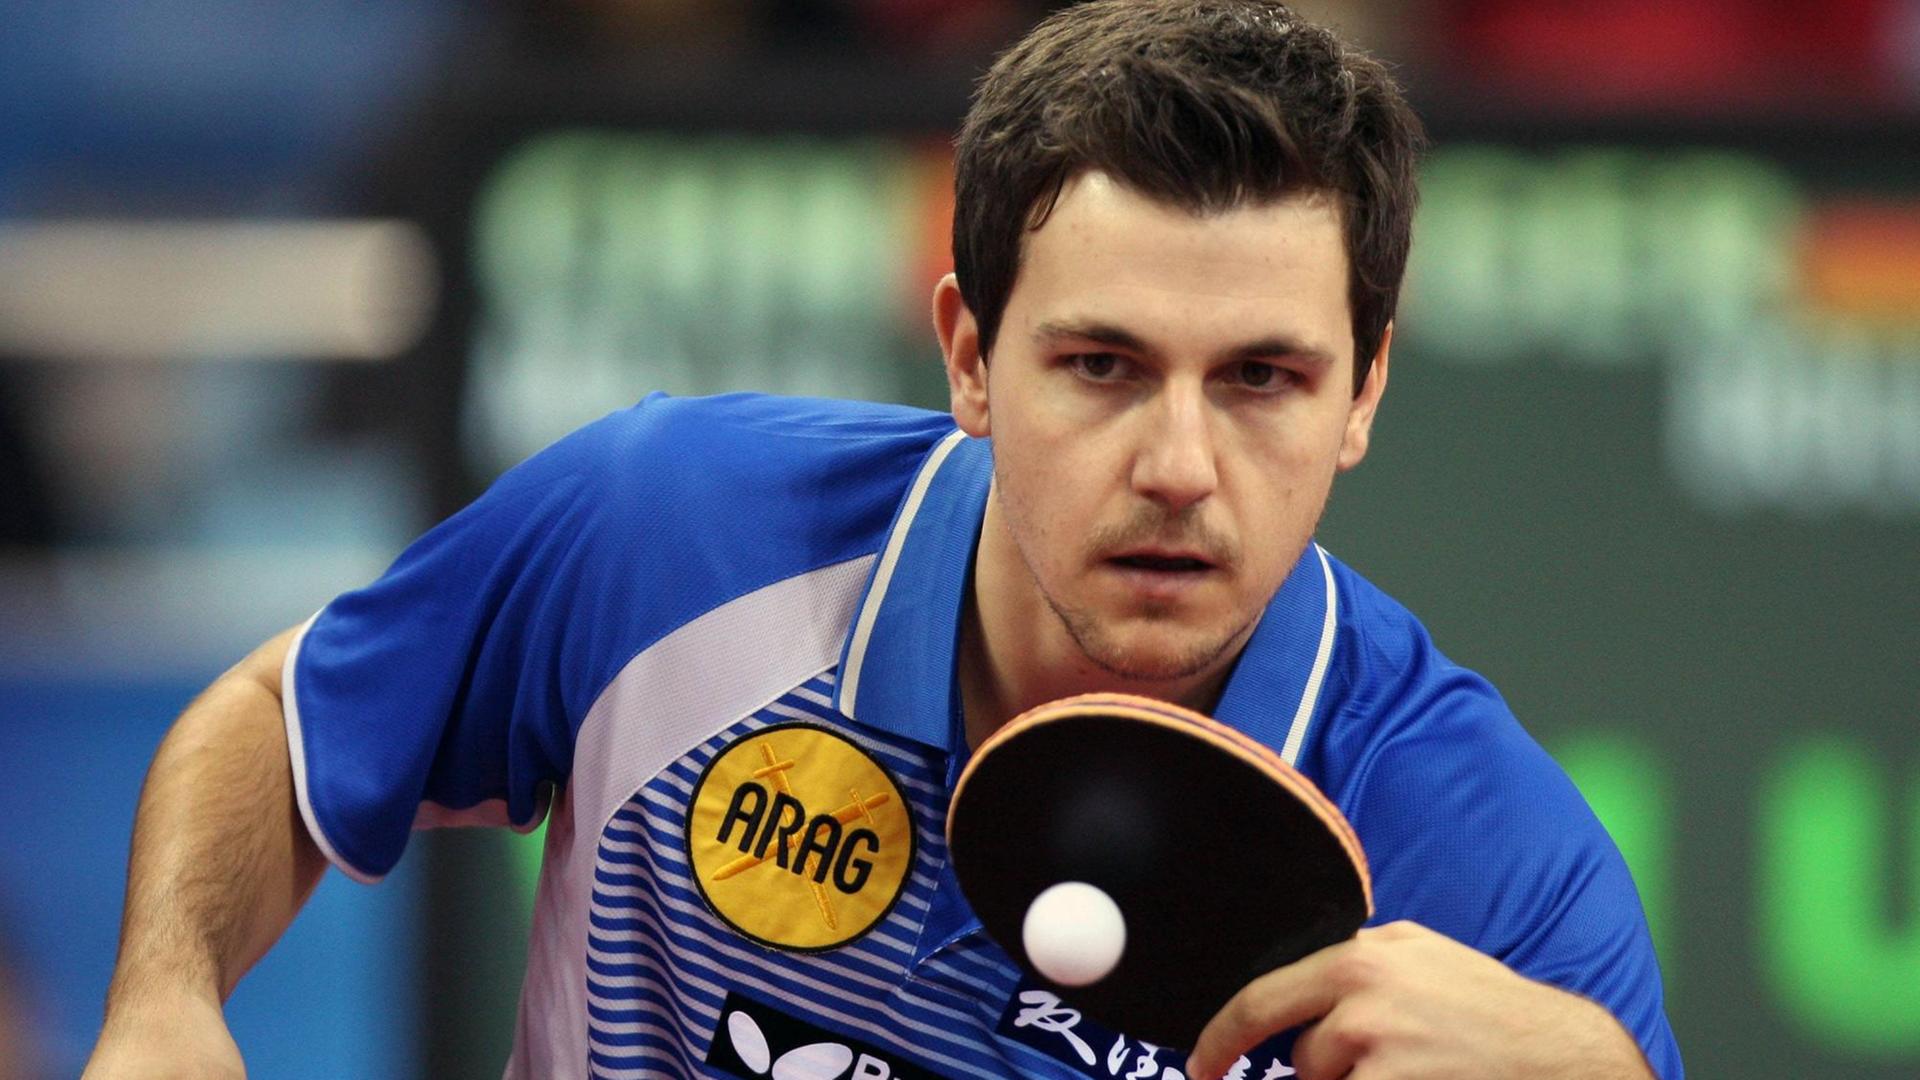 Dec 15, 2007 - Beijing, China - Germany s TIMO BOLL in action during the men s single match against China s Ma Lin in the Good Luck Beijing 2007 Volkswagen Pro Tour Grand Finals at the Peking University Gymnasium in Beijing, China Saturday, Dec. 15, 2007. Ma Lin won with 4-2. A total of 57 players from 15 countries and regions won the tickets to the ITTF calendar event, held at Peking University Gymnasium, venue for the table tennis competition of the Beijing Olympic Games. PUBLICATIONxINxGERxSUIxAUTxONLY - ZUMAc32_ 20071215_ave_c32_366 DEC 15 2007 Beijing China Germany S Timo Boll in Action during The Men S Single Match against China S MA Lin in The Good Luck Beijing 2007 Volkswagen pro Tour Grand Finals AT The Beijing University Gymnasium in Beijing China Saturday DEC 15 2007 MA Lin Won With 4 2 a total of 57 Players from 15 Countries and Regions Won The Tickets to The ITTF Calendar Event Hero AT Beijing University Gymnasium Venue for The Table Tennis Competition of The Beijing Olympic Games PUBLICATIONxINxGERxSUIxAUTxONLY ZUMAc32_ 20071215_ave_c32_366